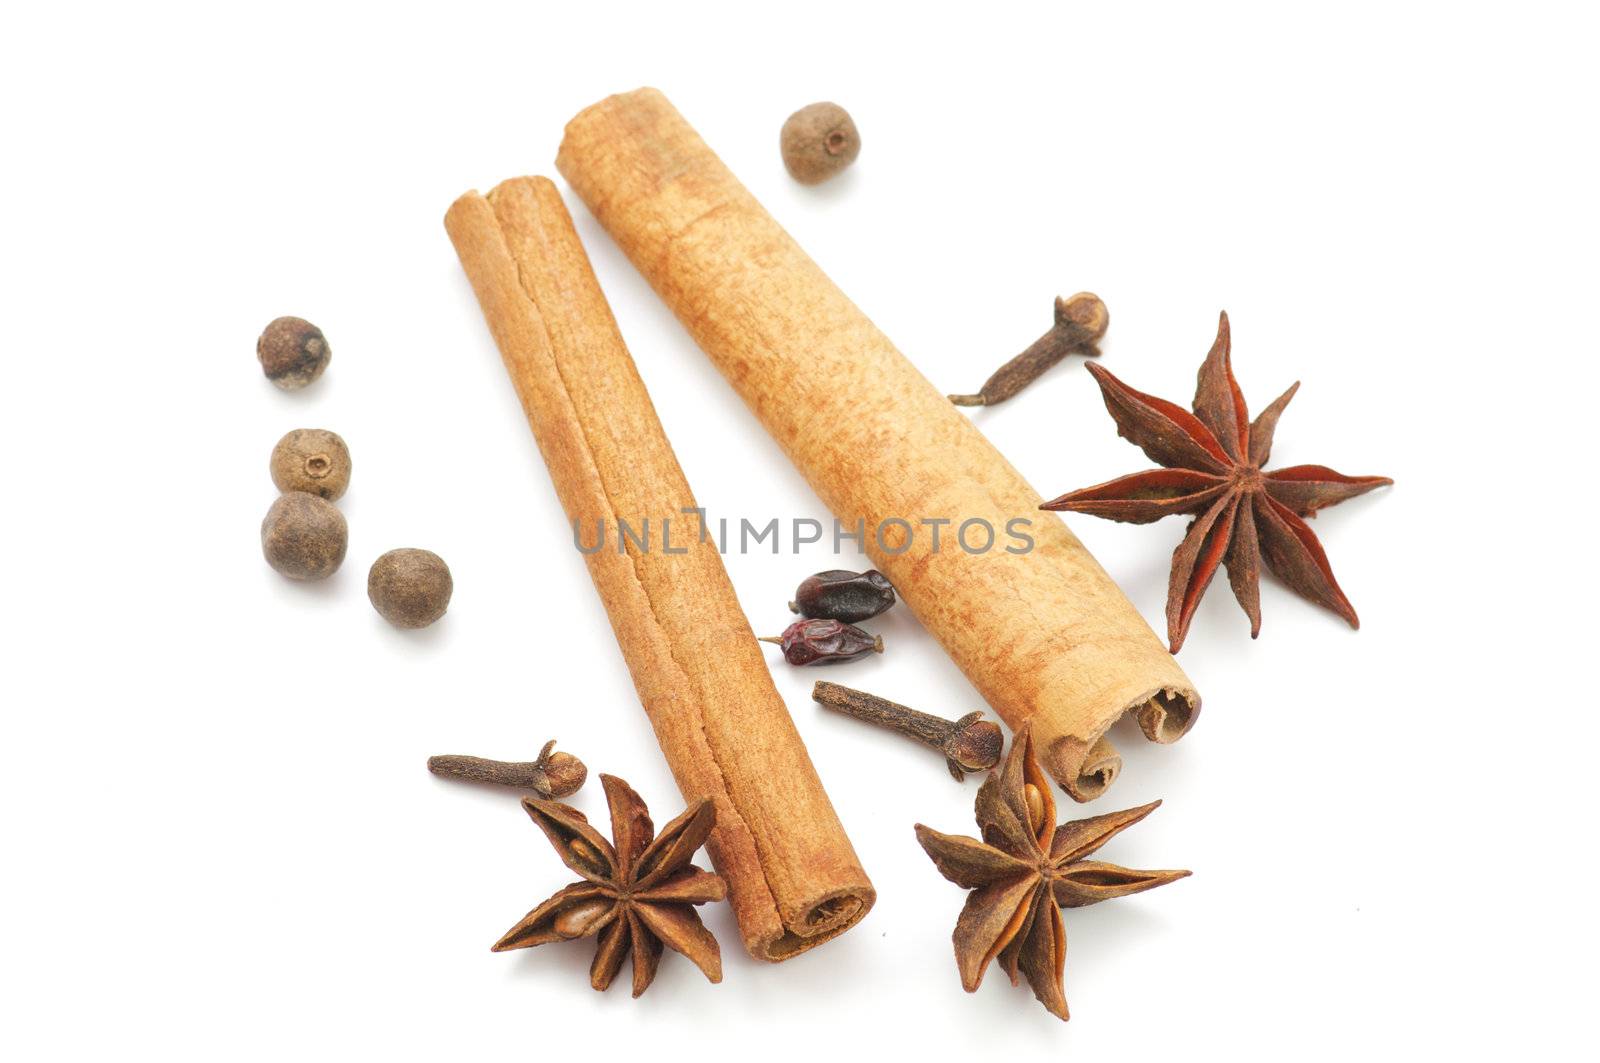 Cinnamon sticks and spicy spices by zhekos